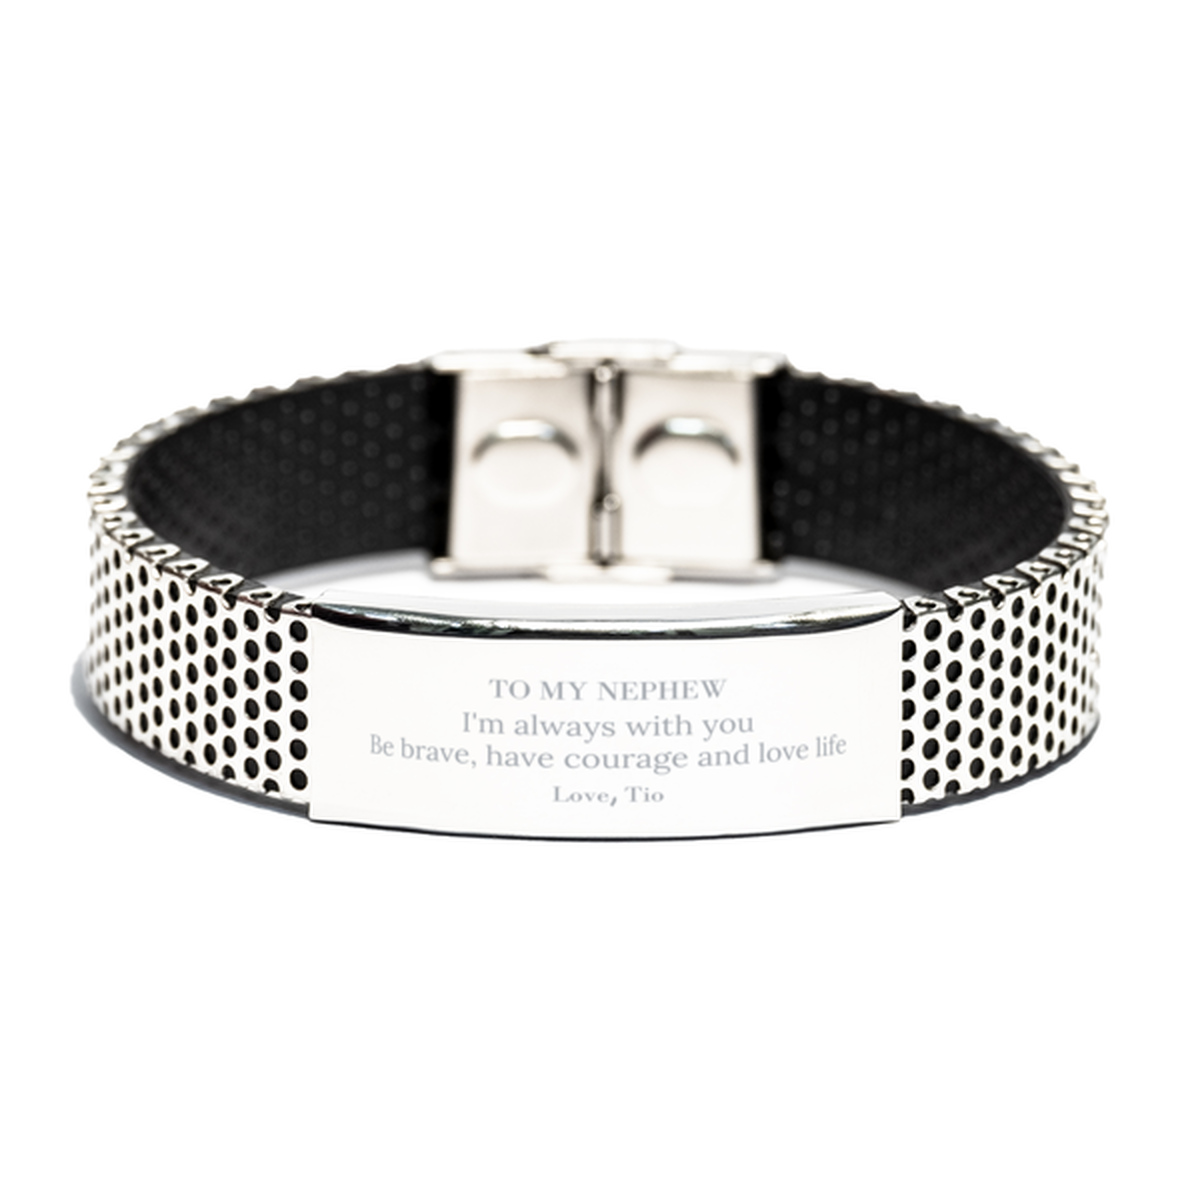 To My Nephew Gifts from Tio, Unique Stainless Steel Bracelet Inspirational Christmas Birthday Graduation Gifts for Nephew I'm always with you. Be brave, have courage and love life. Love, Tio